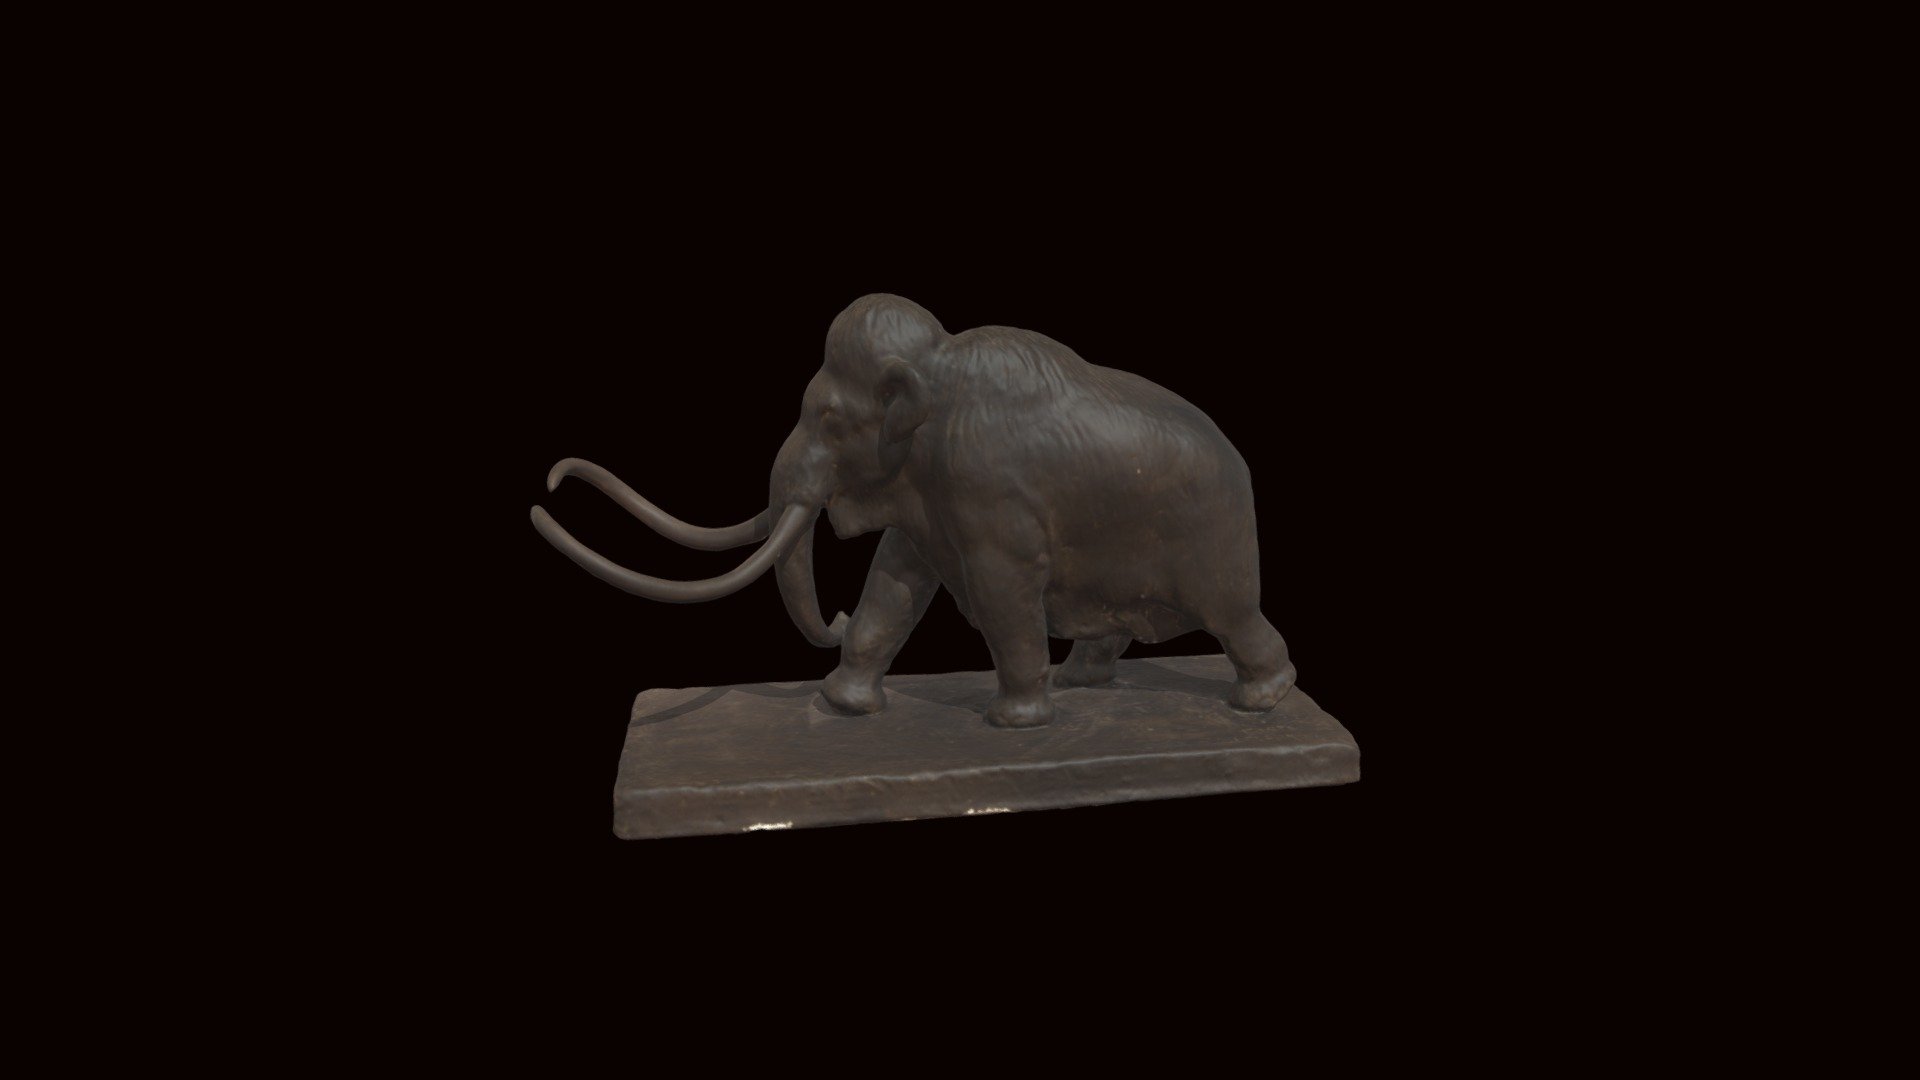 This mammoth sculpture was created by James L. Clark (1883-1969) in 1956. It was 3D scanned with a Go!Scan 50 on 25 May 2022 at the New York State Museum. Courtesy of the New York State Museum 3d model